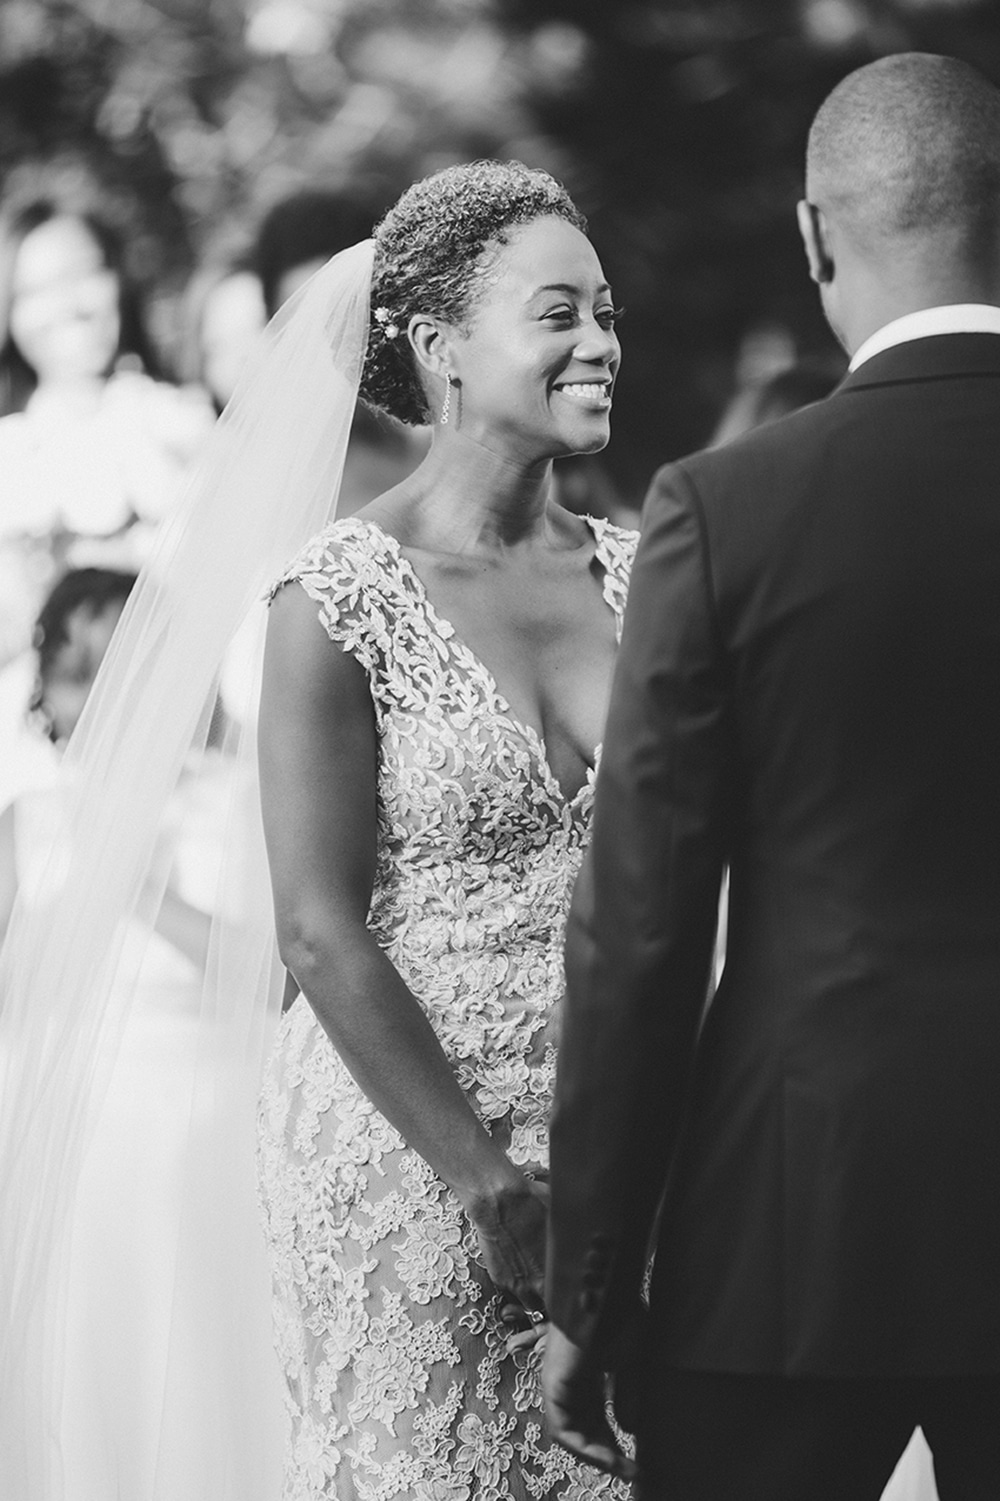 A documentary photograph of a bride smiling during her wedding ceremony on Martha's Vineyard